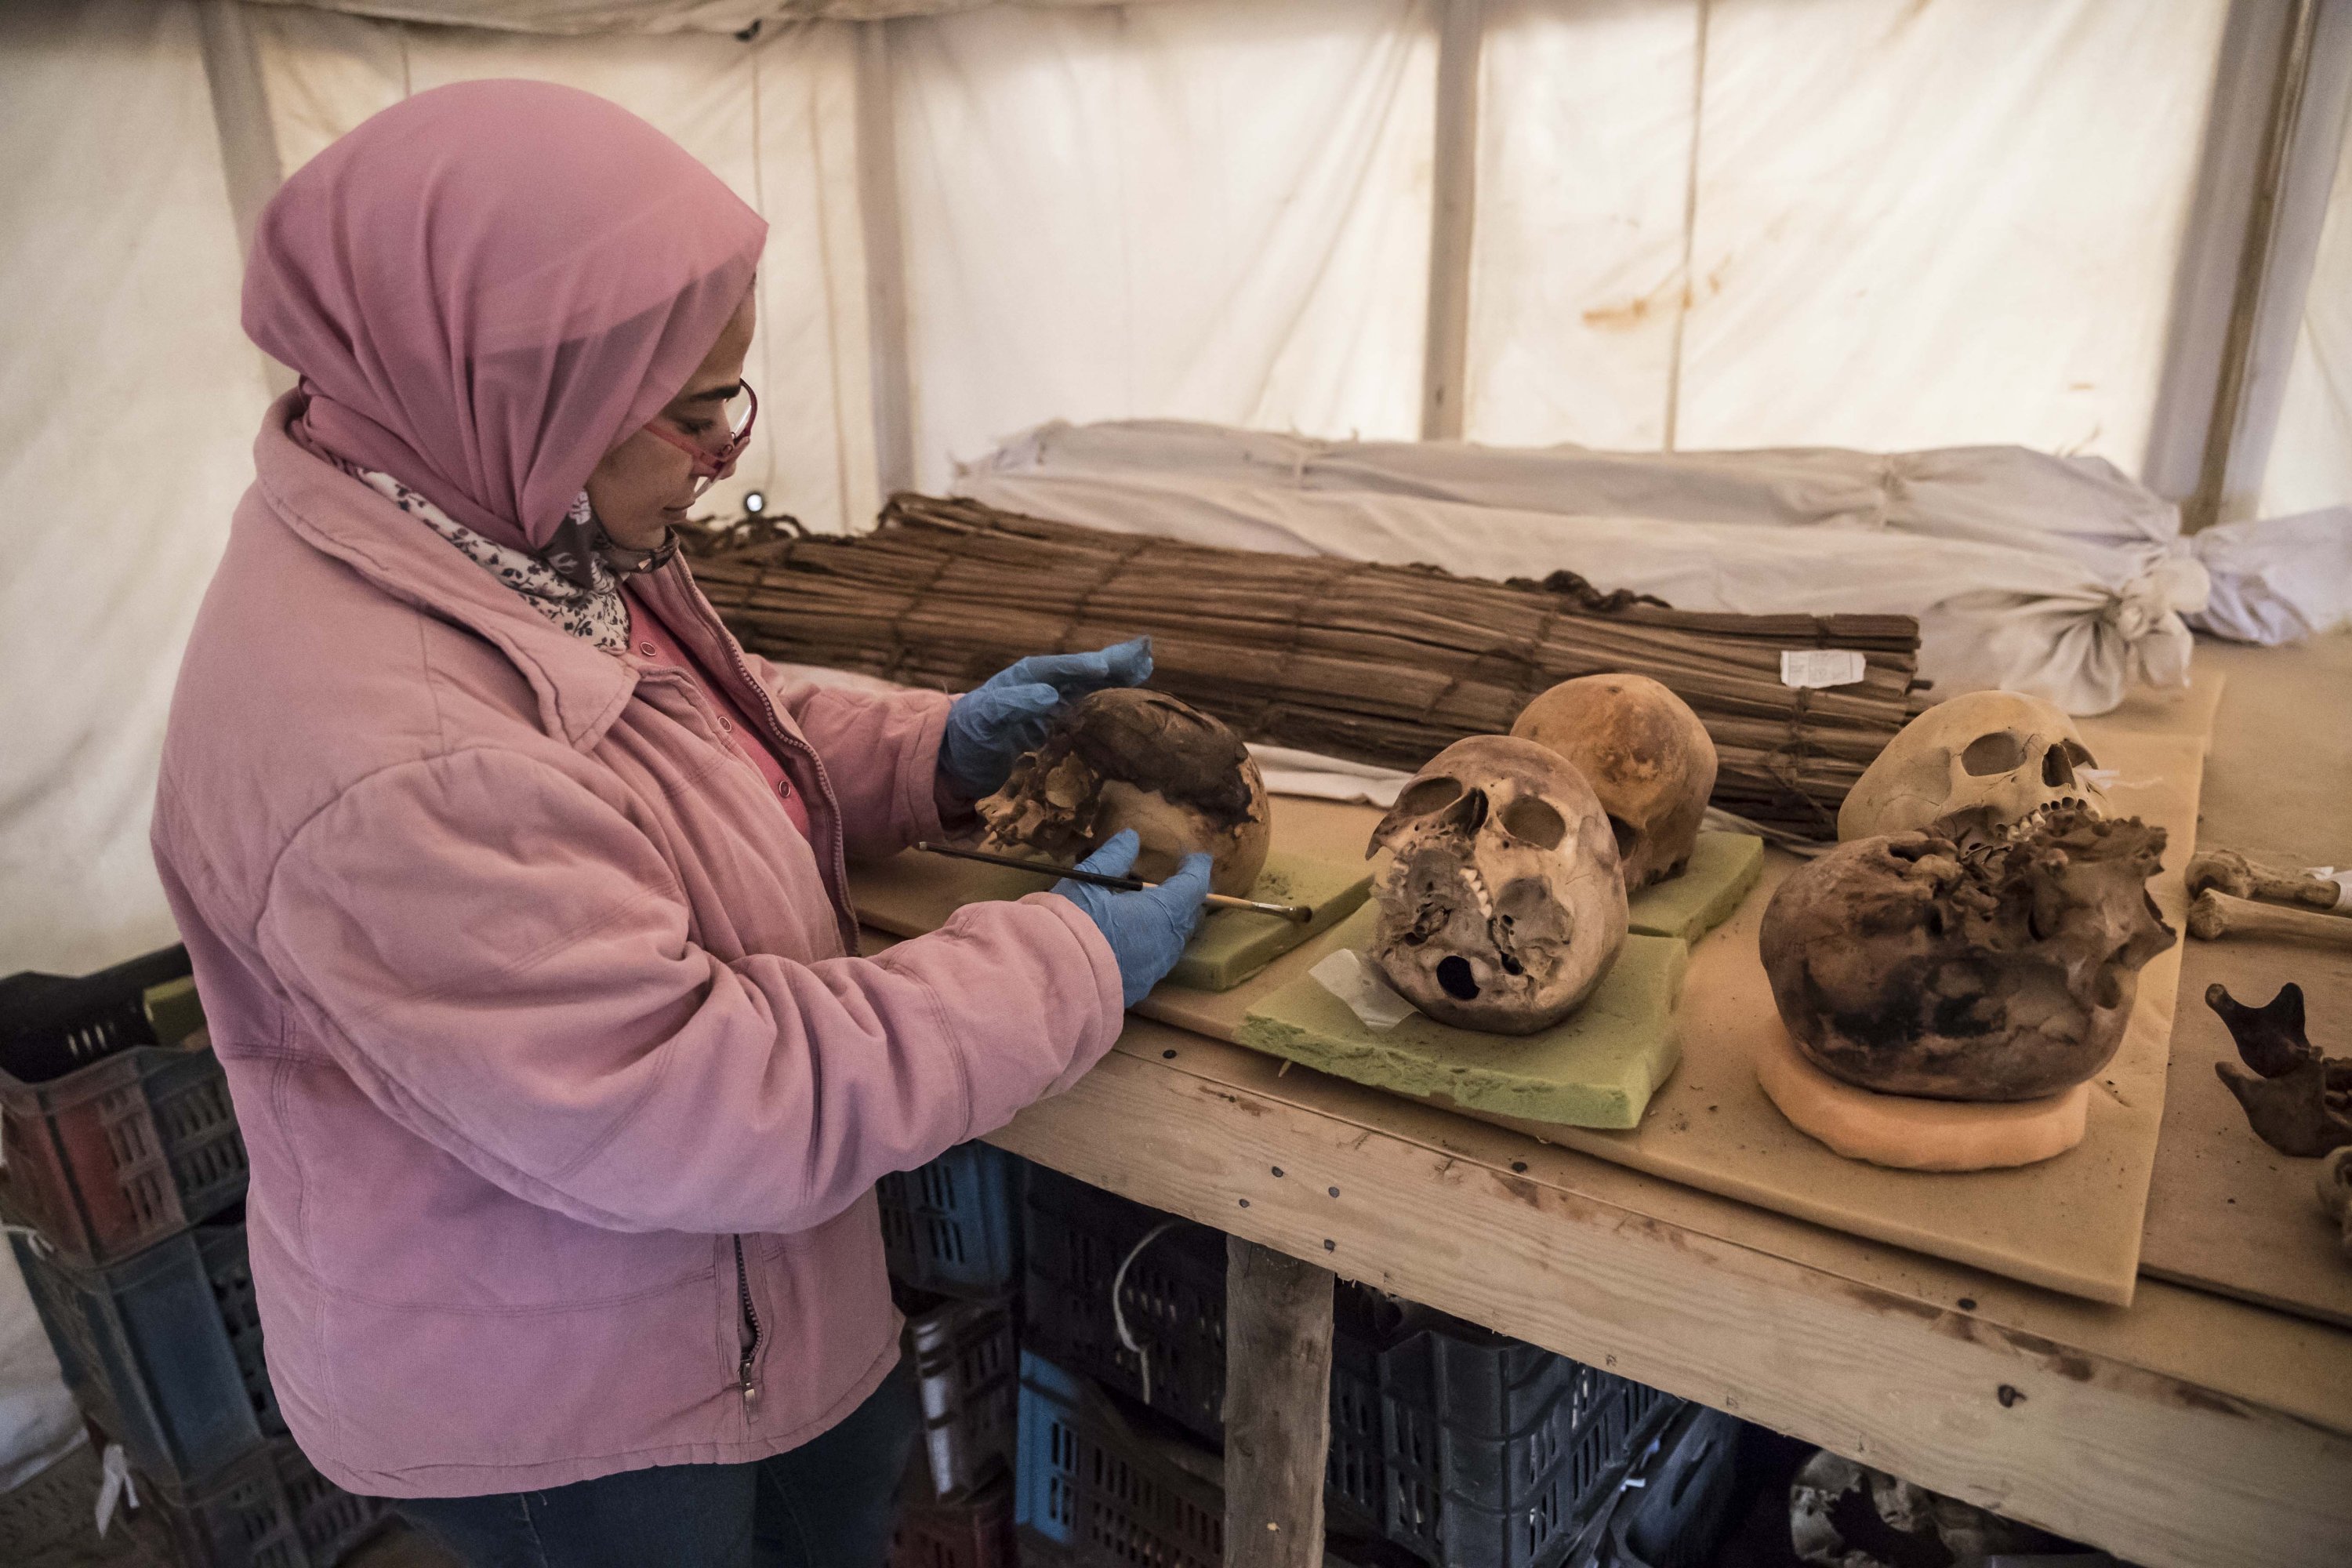 An archaeologist displays unearthed human skulls ahead of the official announcement of the discovery at Egypt